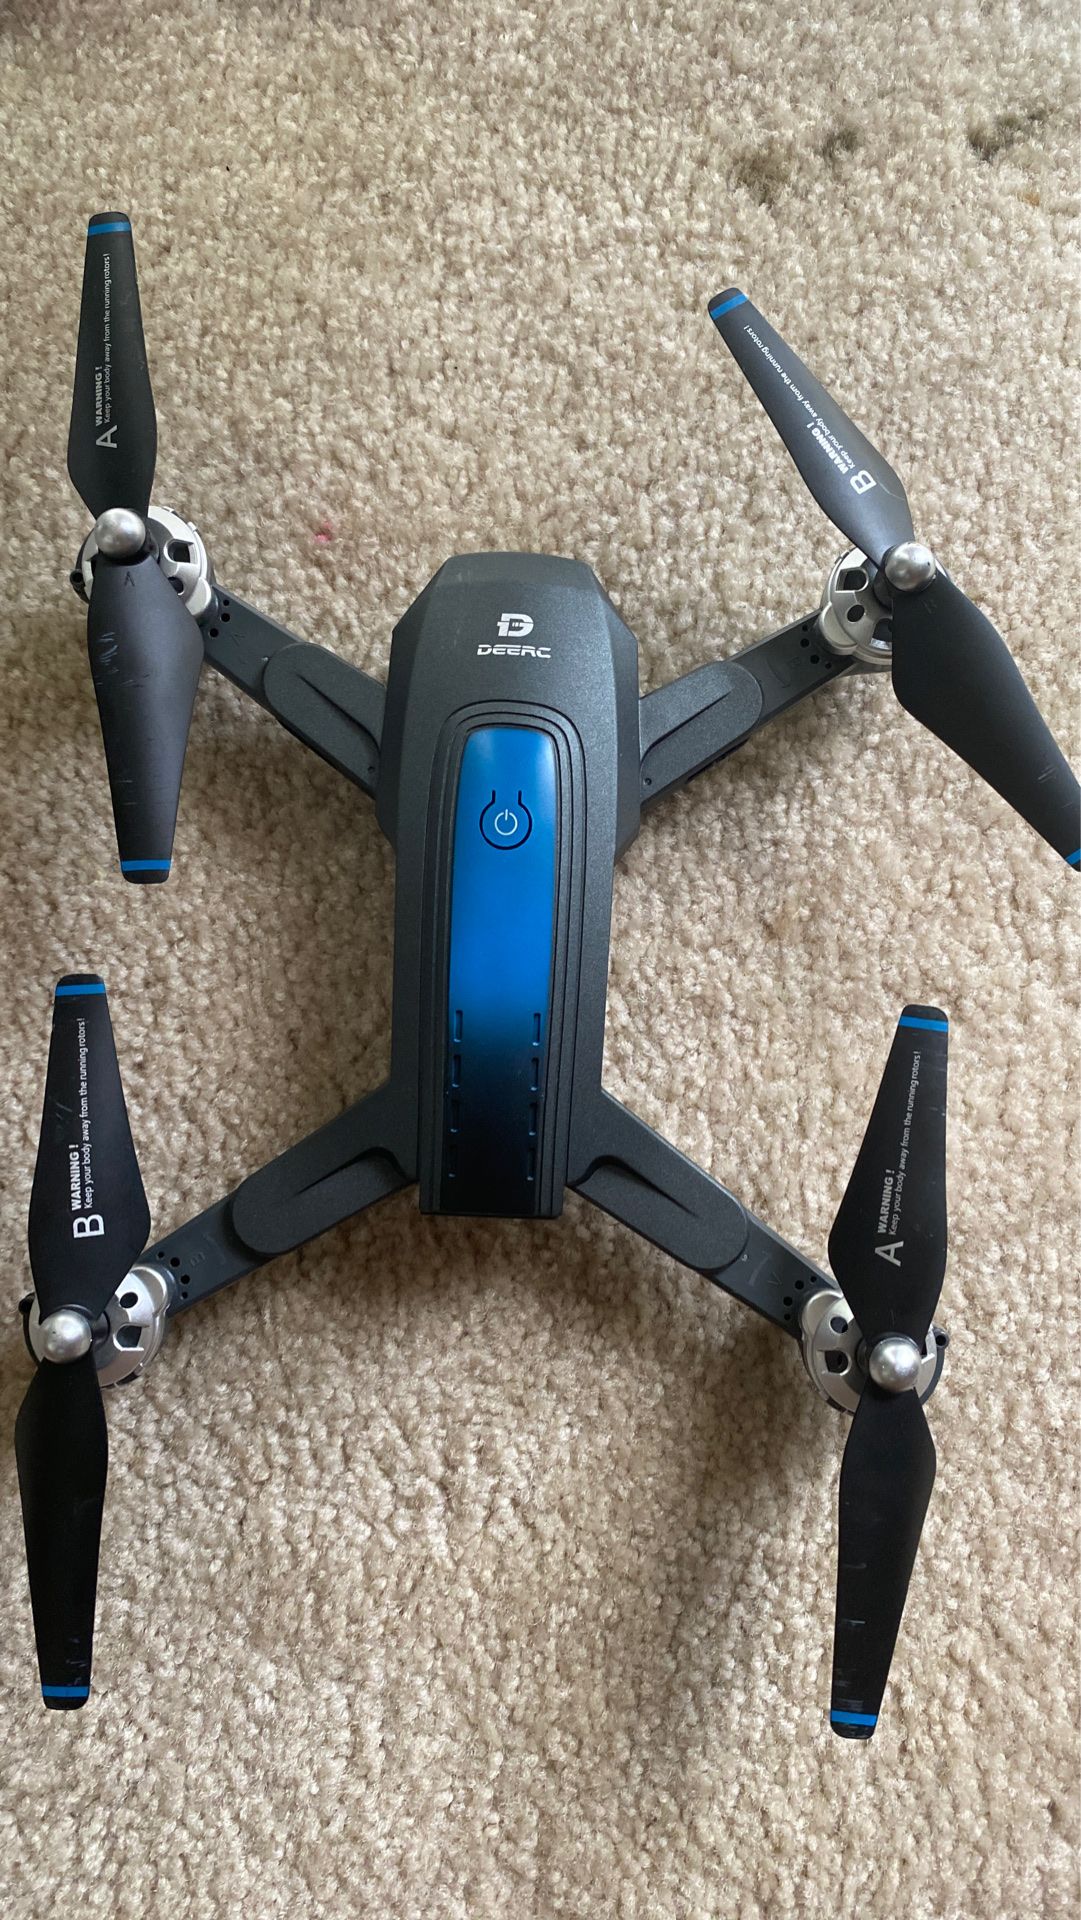 Deerc D10 drone. With camera, video, and image transmission